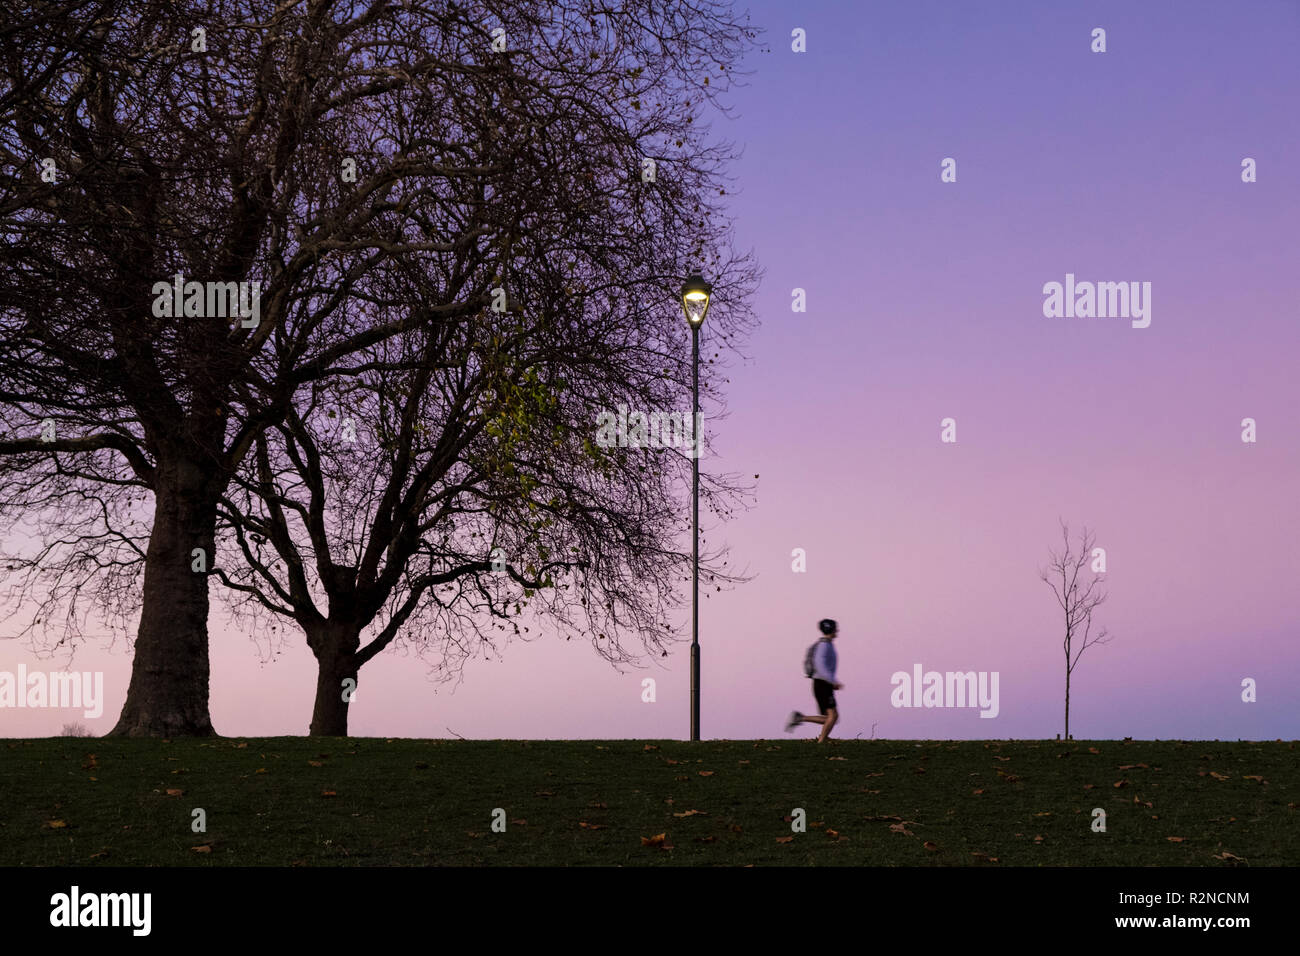 Person jogging. Man running or training in a park at night, Nottingham, England, UK Stock Photo